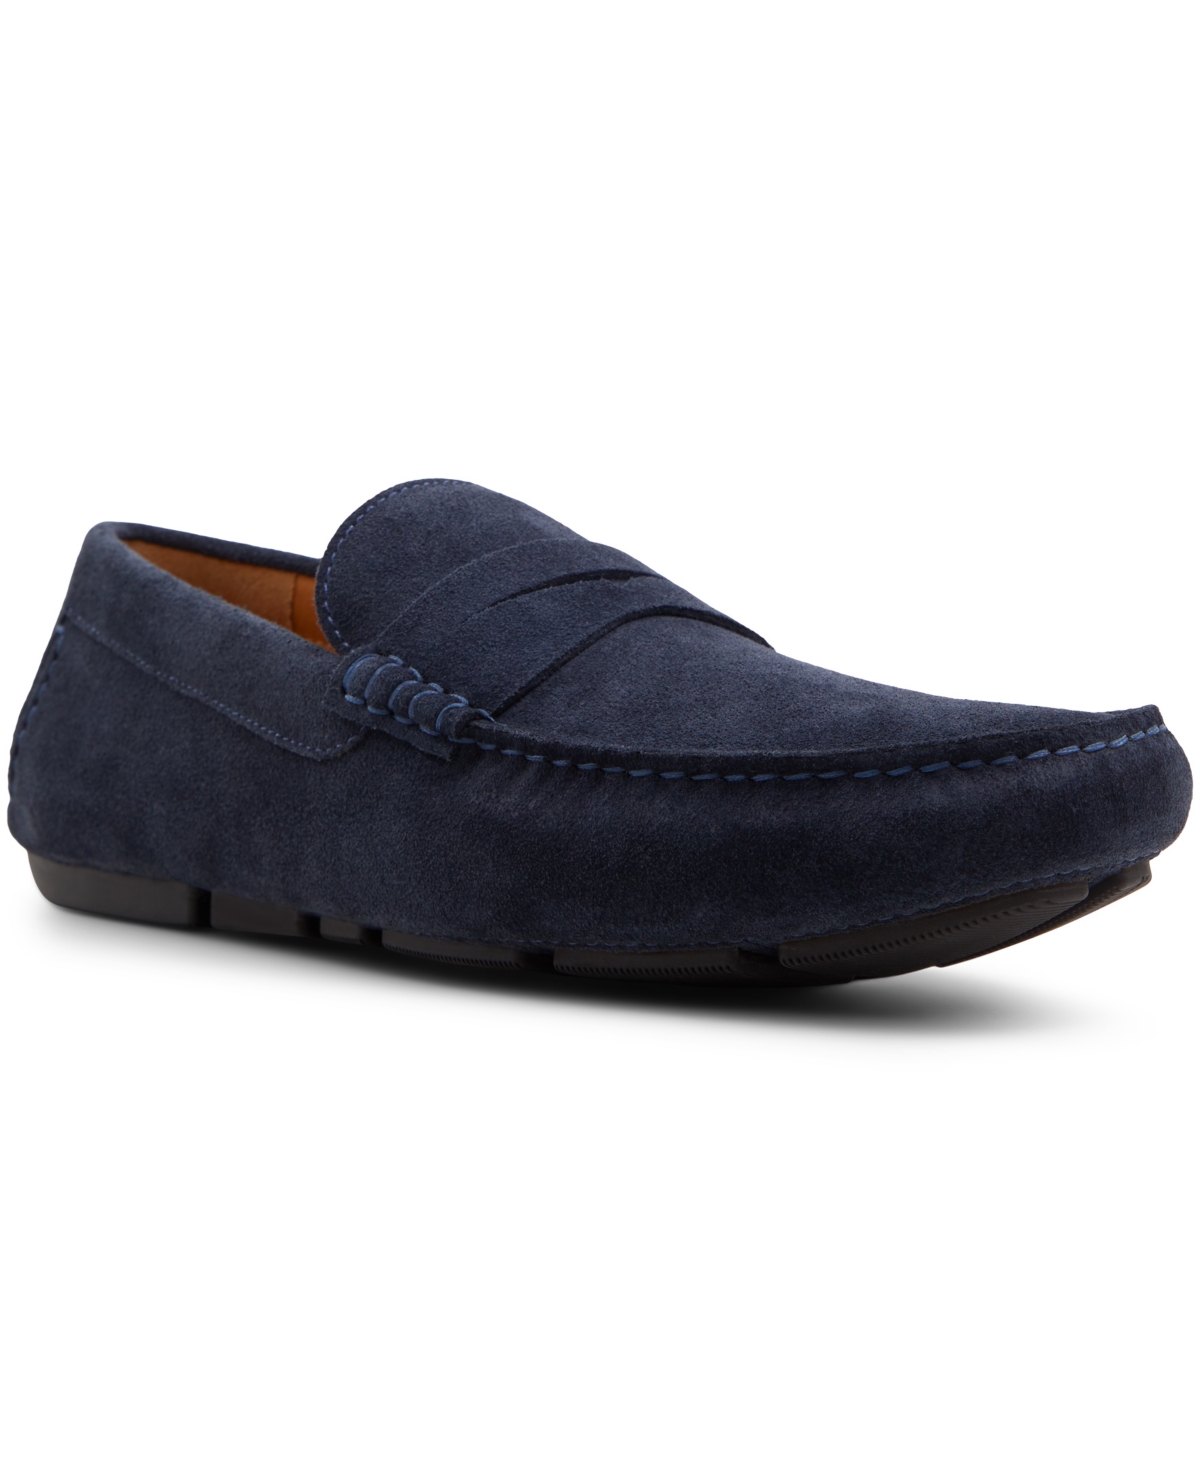 Men's Jefferson Moccasin Driving Loafers - Navy